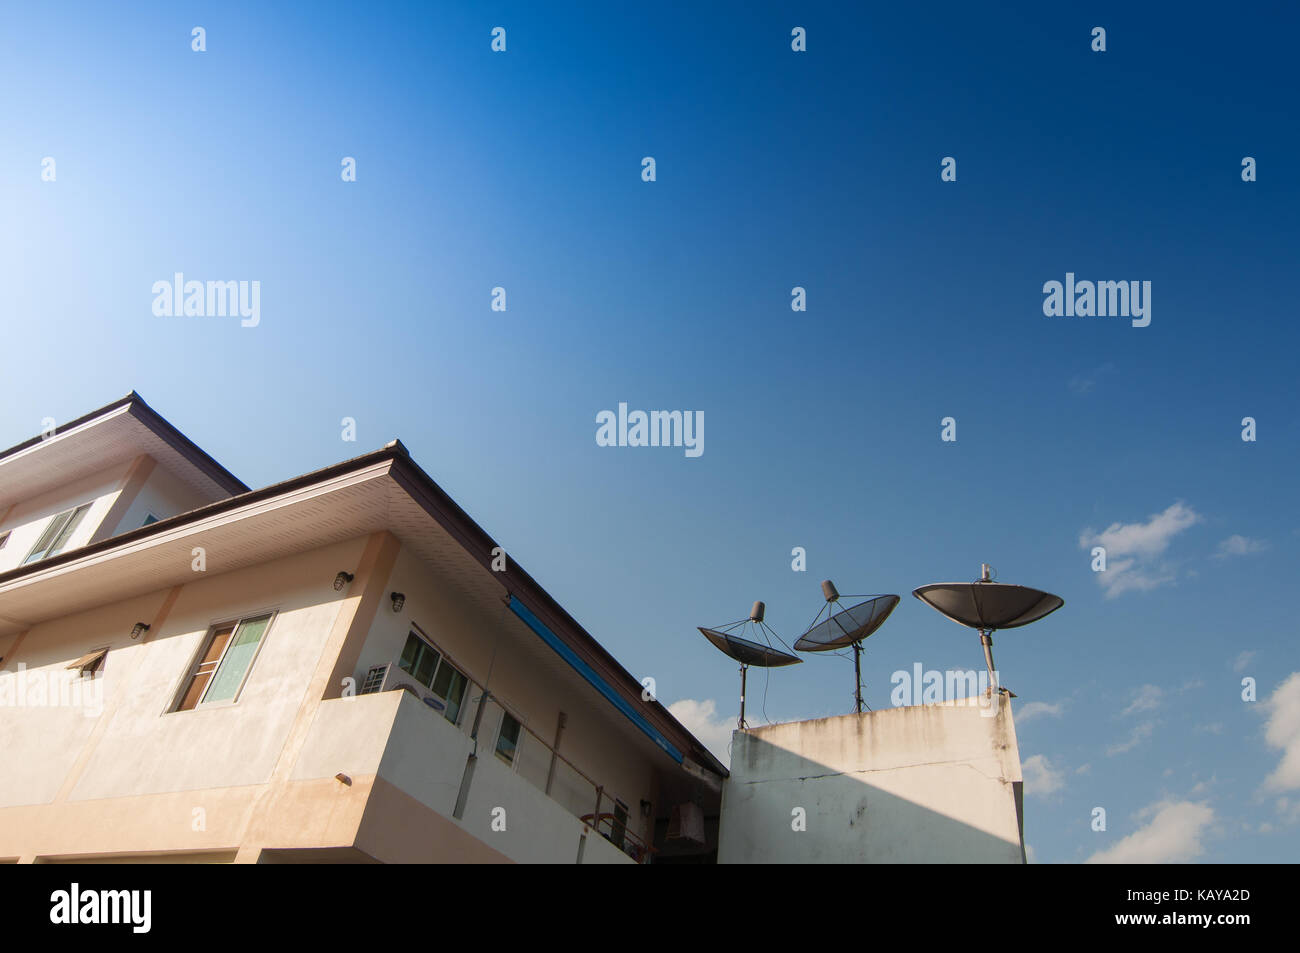 Home and receiver satlelite on a roof with Blue sky cloudy backgrounds Stock Photo